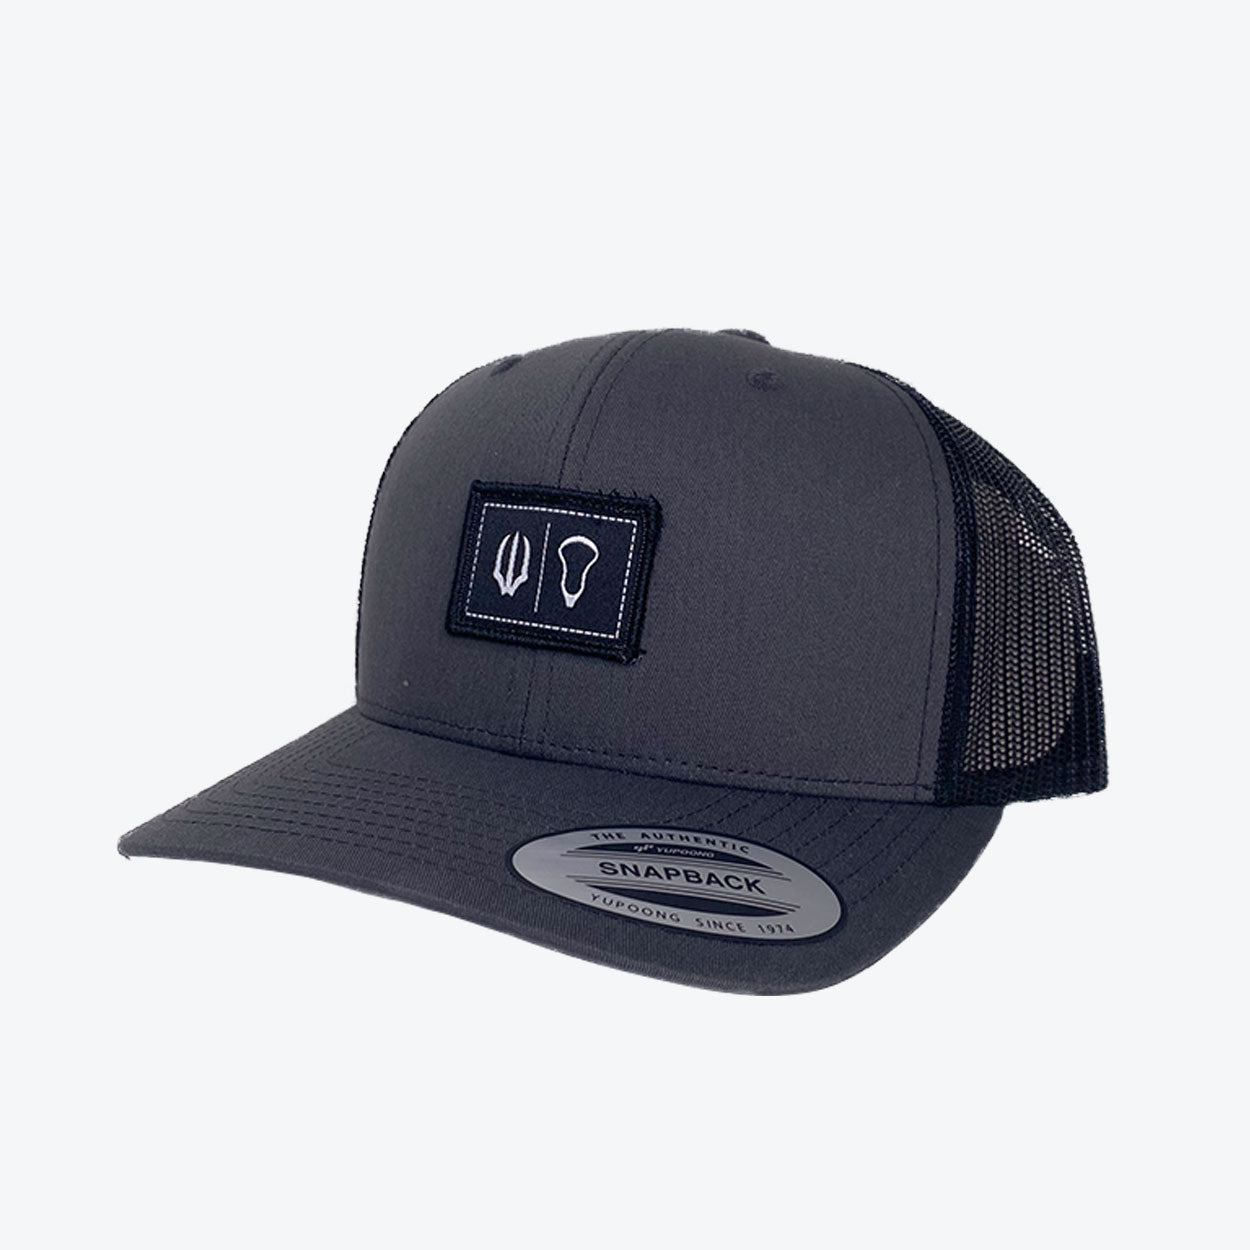 Wolf Athletics - Trucker Hat - Snapback - Charcoal and Black